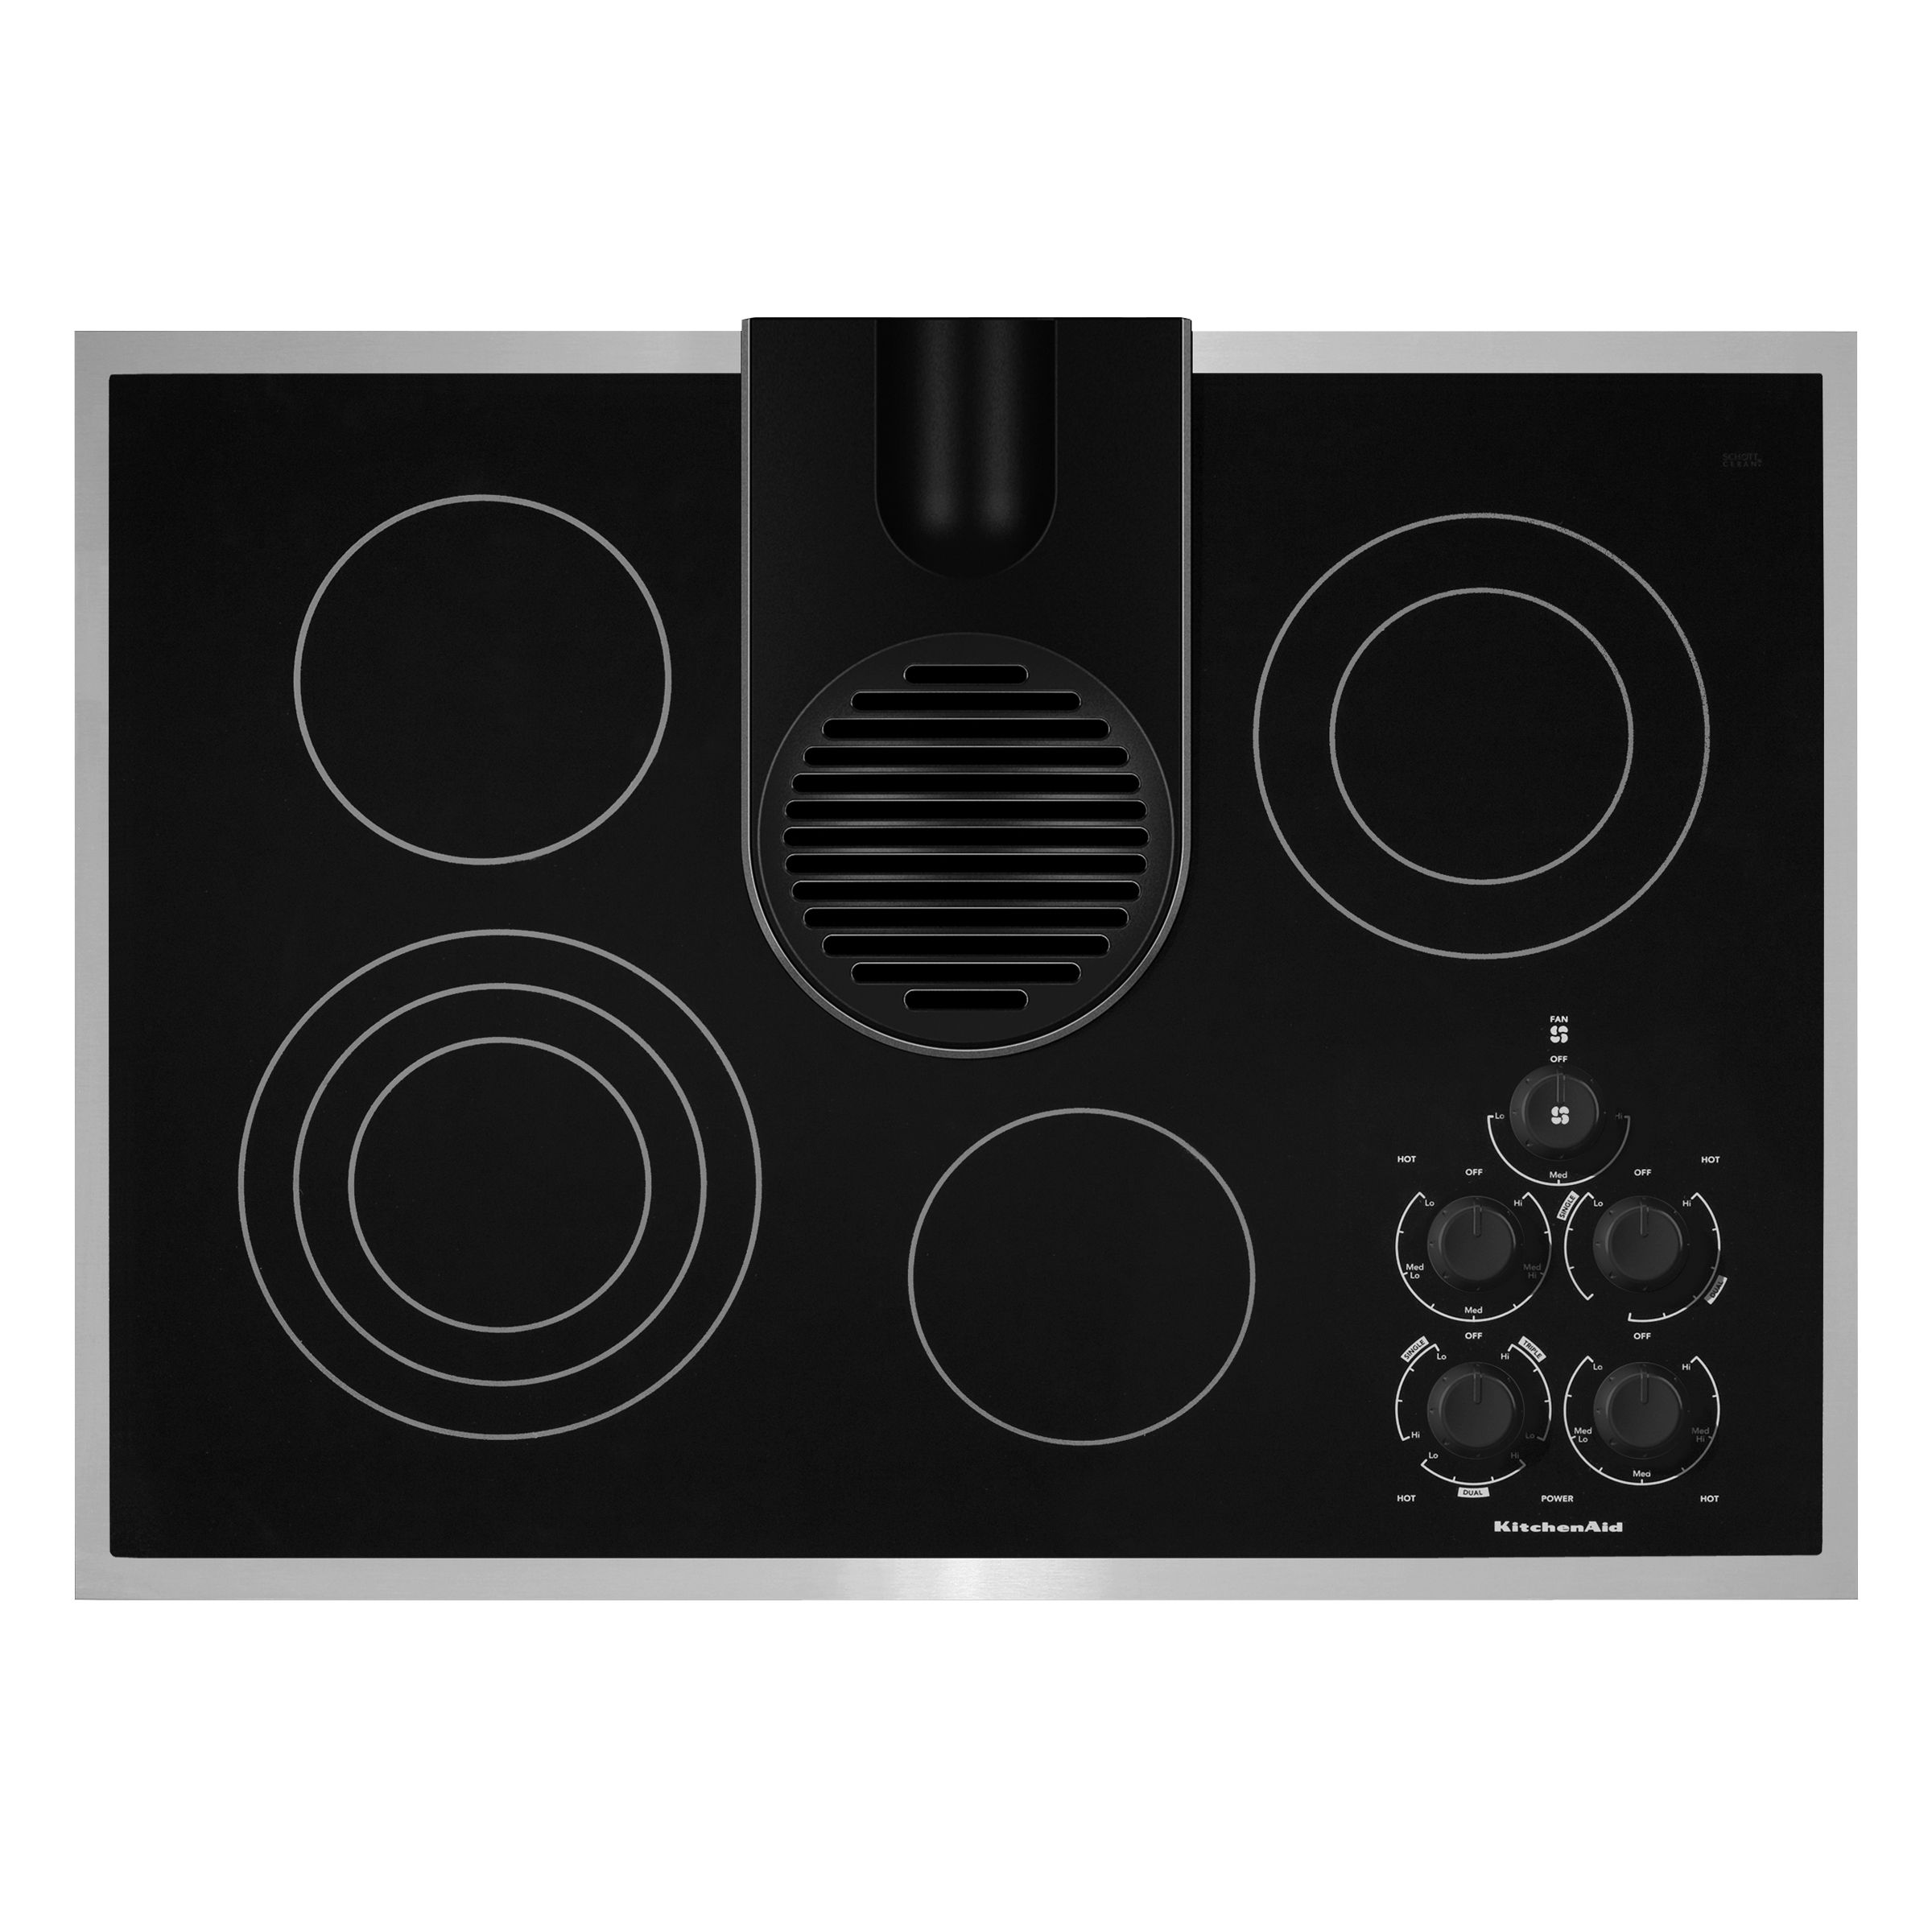 30" Electric Ceramic-Glass Conventional Cooktop with Downdraft Vent System KECD806R